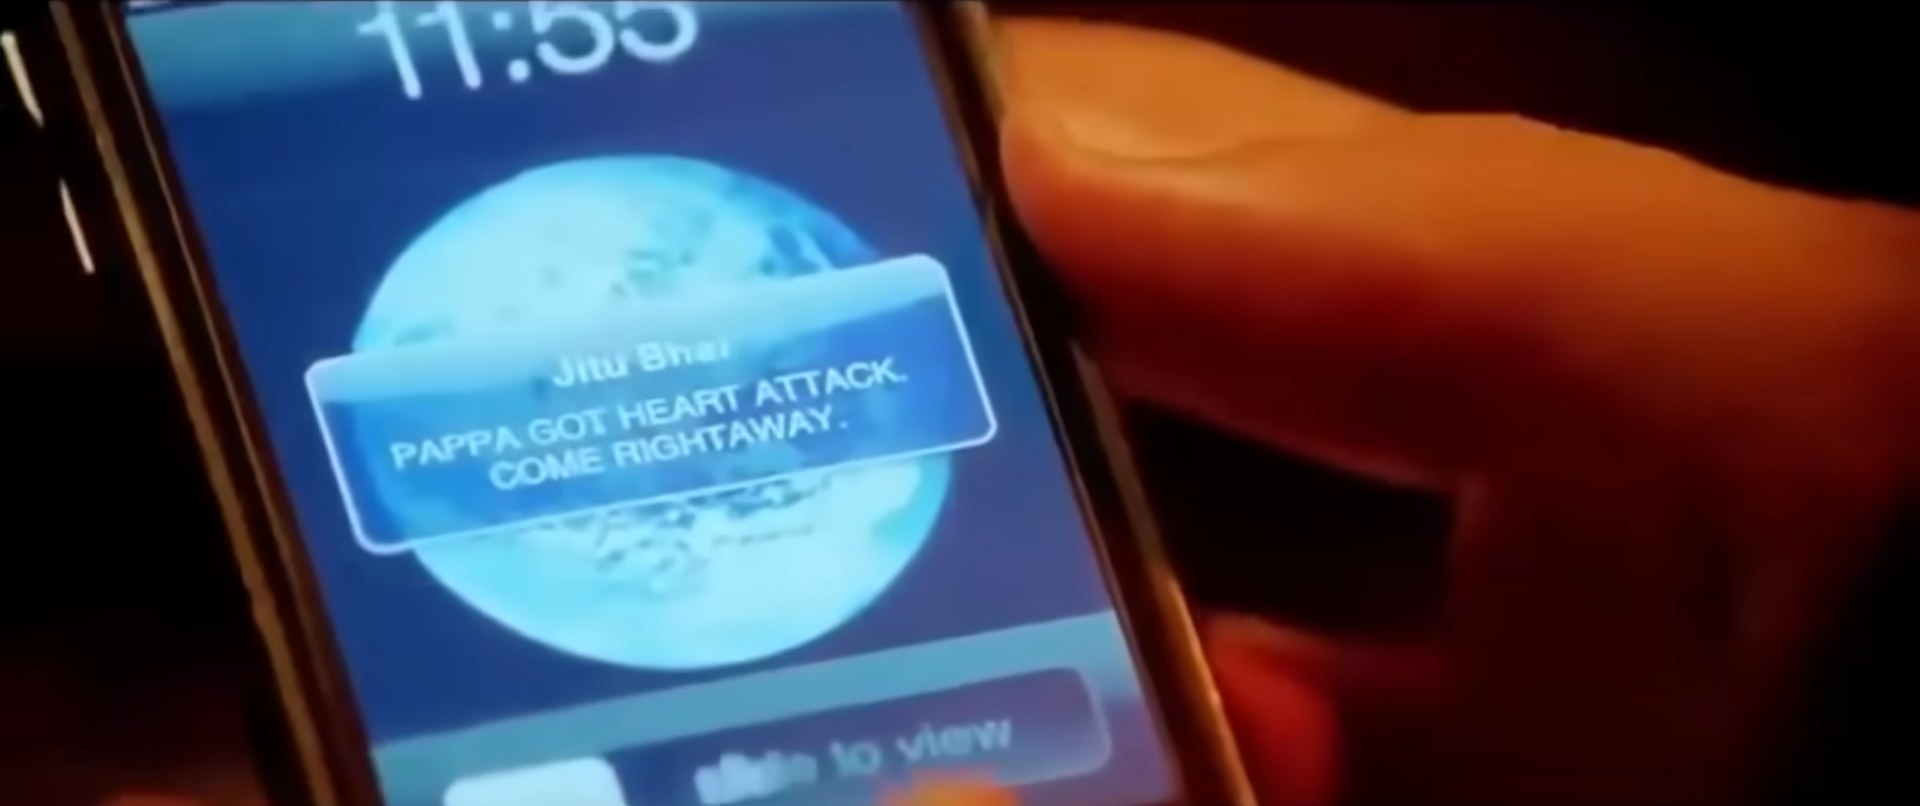 A phone with a text message on the screen